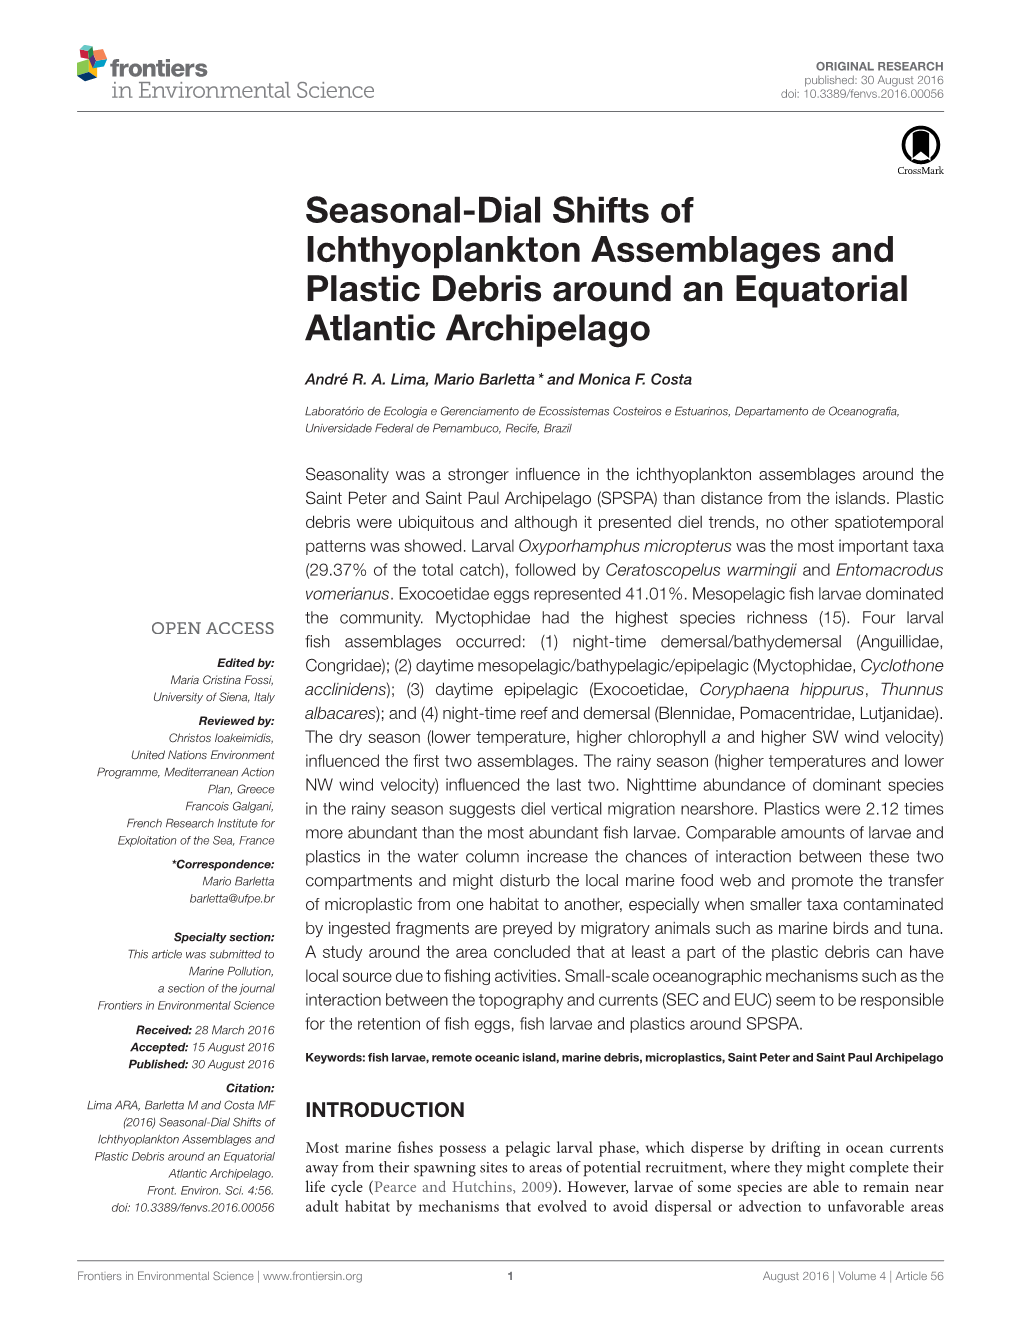 Seasonal-Dial Shifts of Ichthyoplankton Assemblages and Plastic Debris Around an Equatorial Atlantic Archipelago